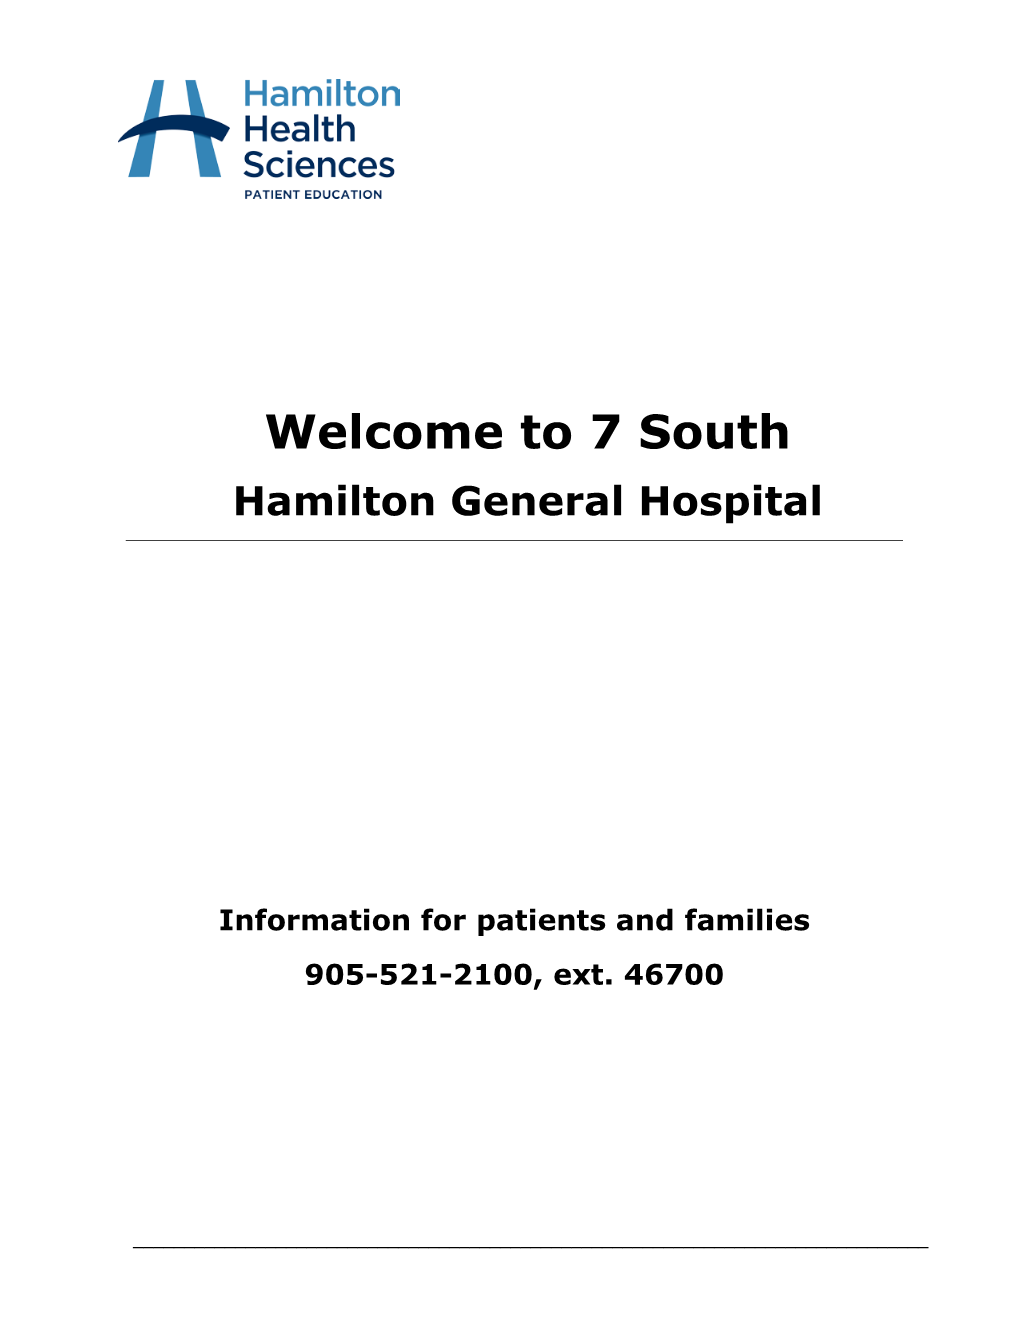 Welcome to 7 South – Hamilton General Hospital